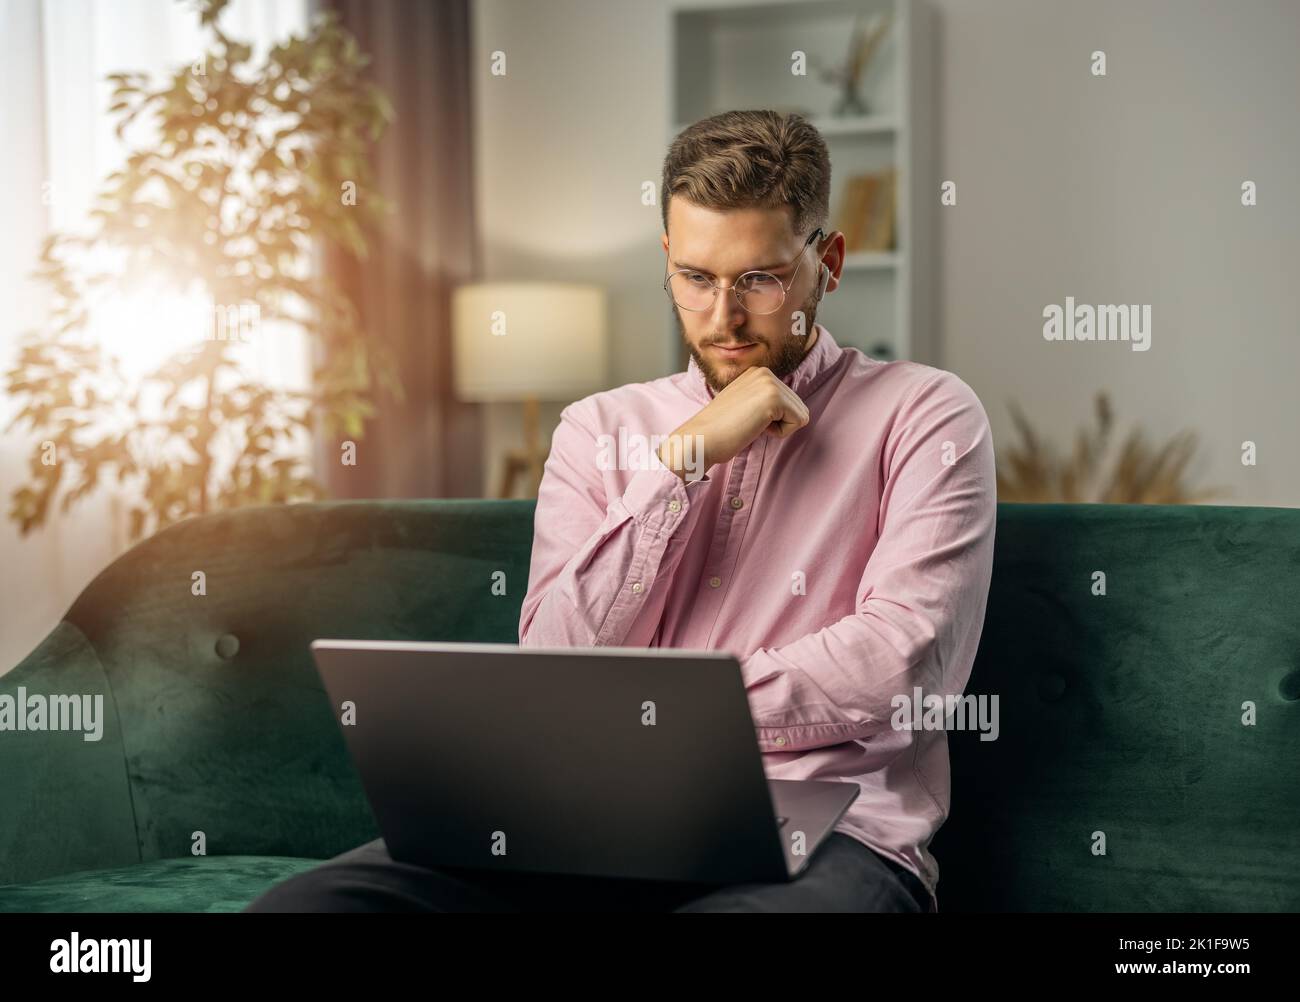 Work from home Stock Photo